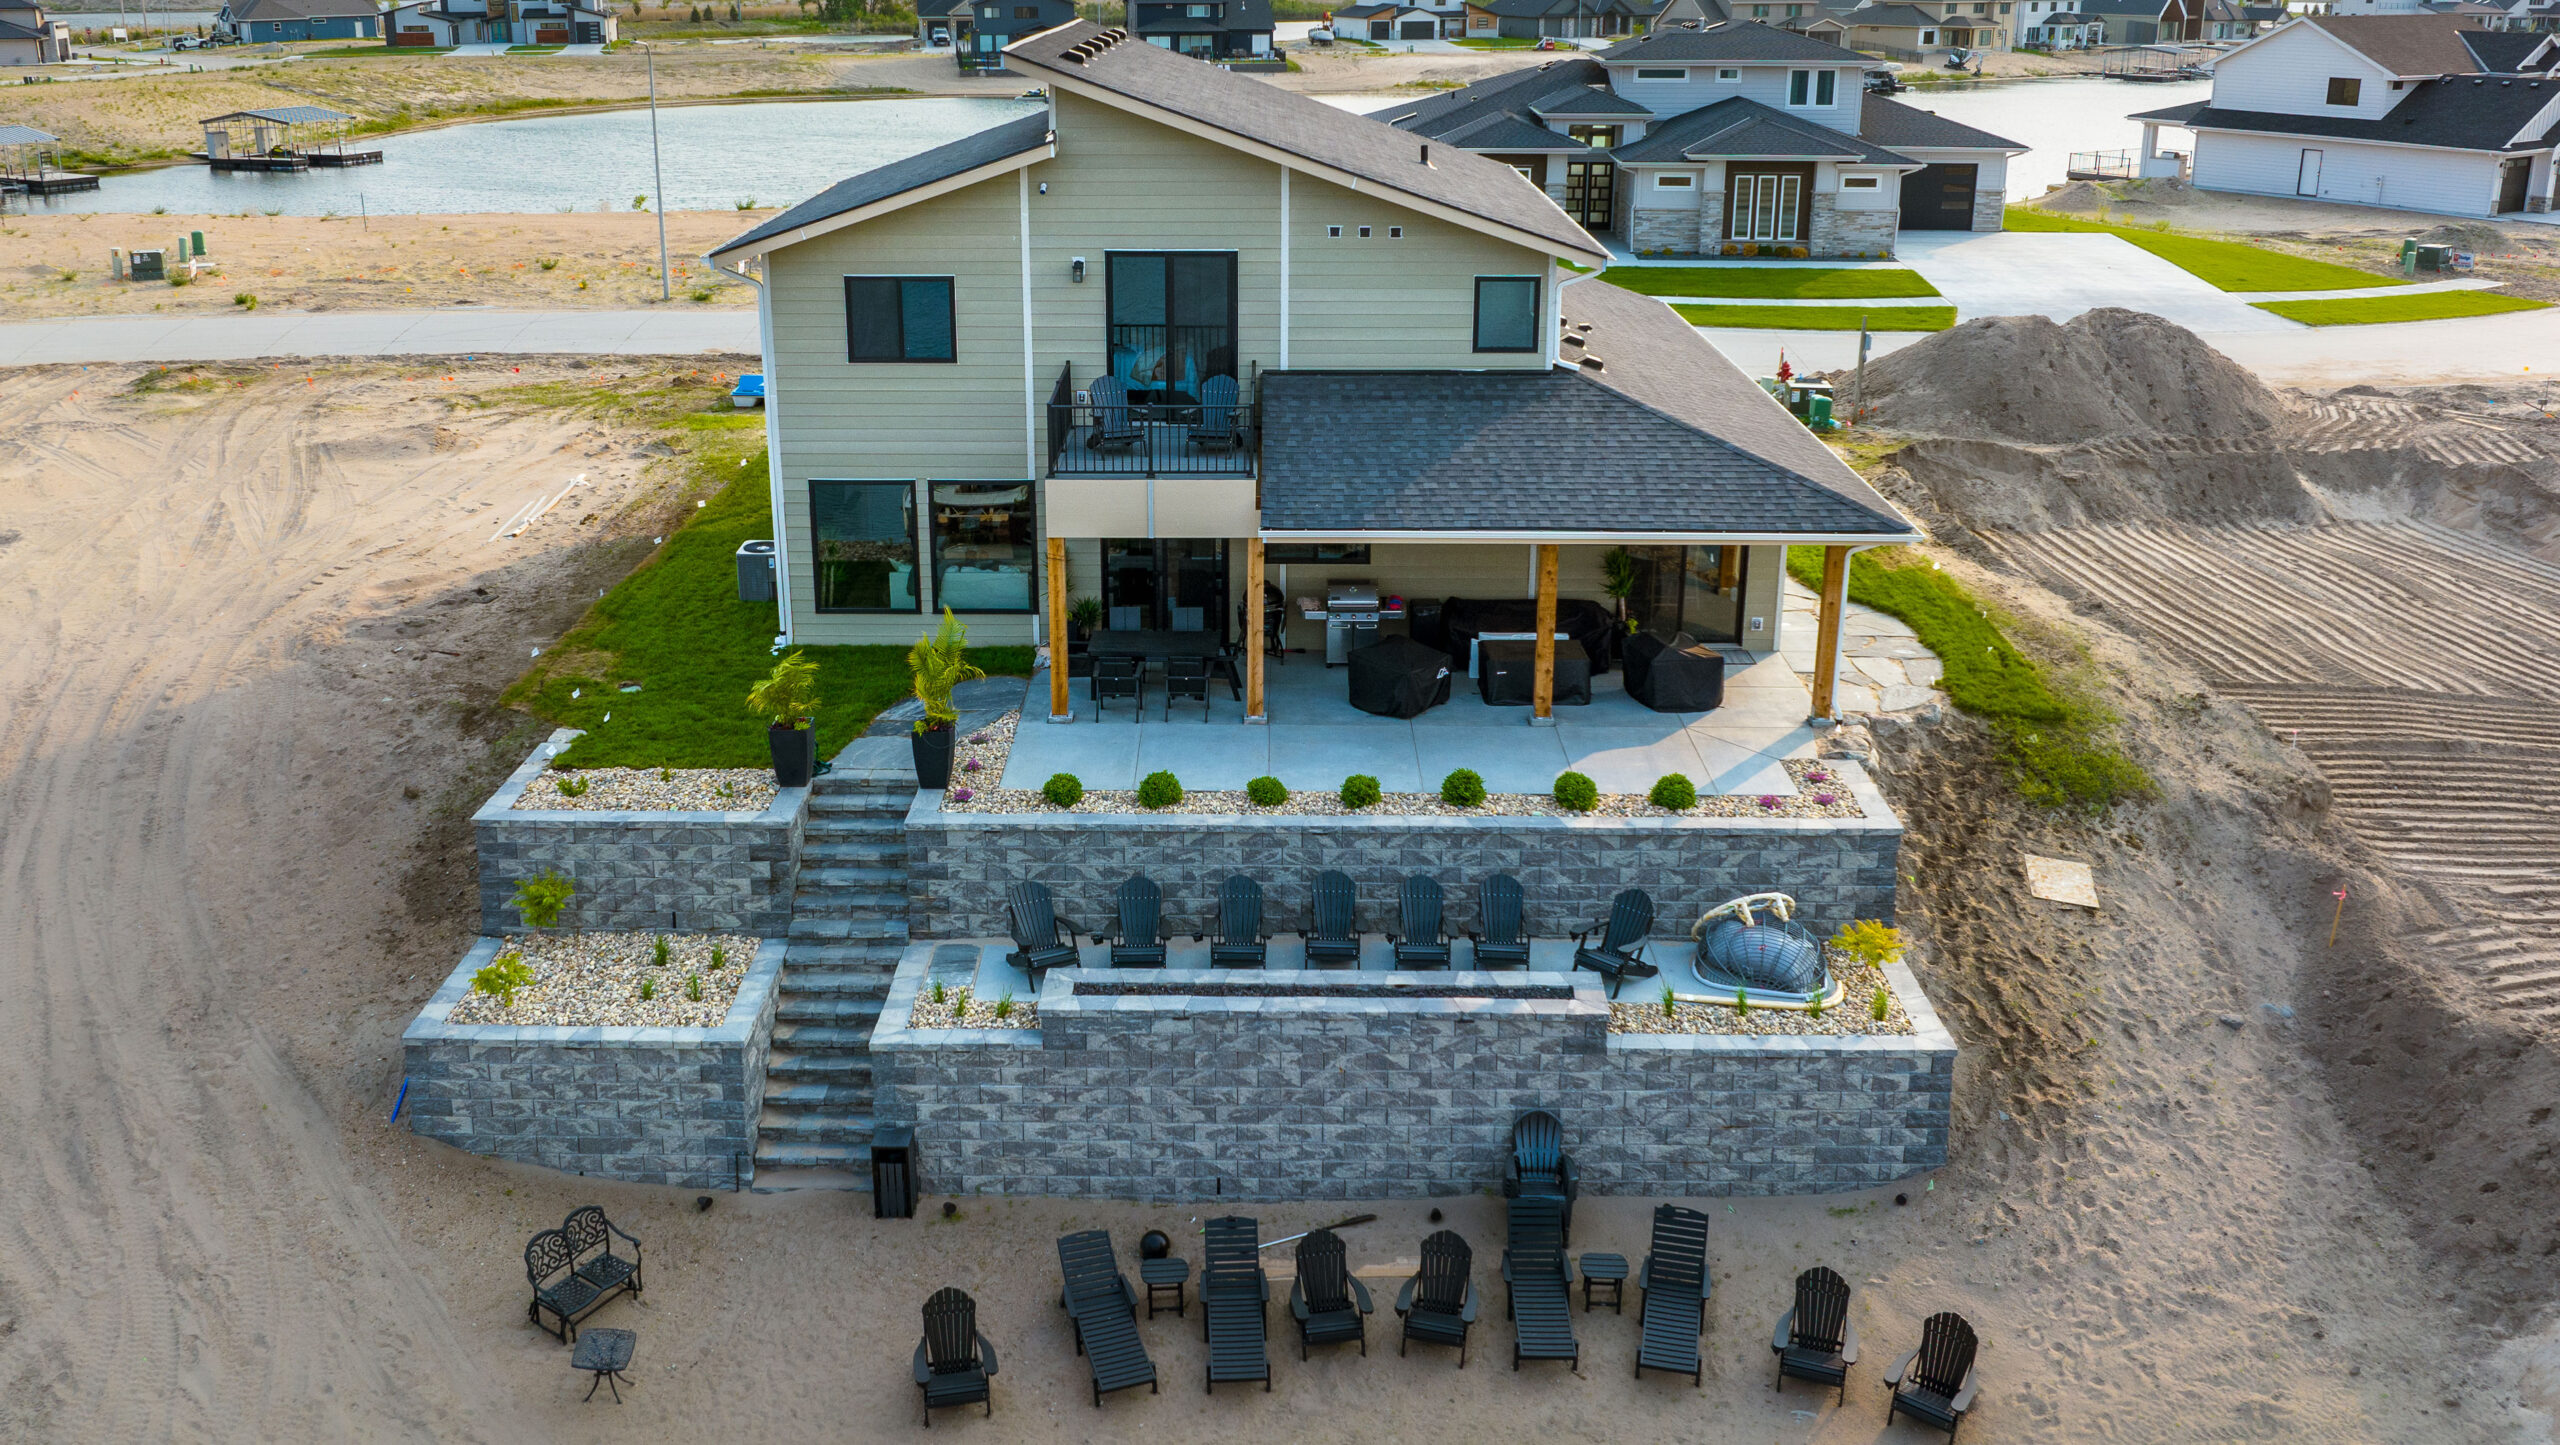 Aerial view of a lakeside house with a multi-level patio, retaining walls, and seating areas